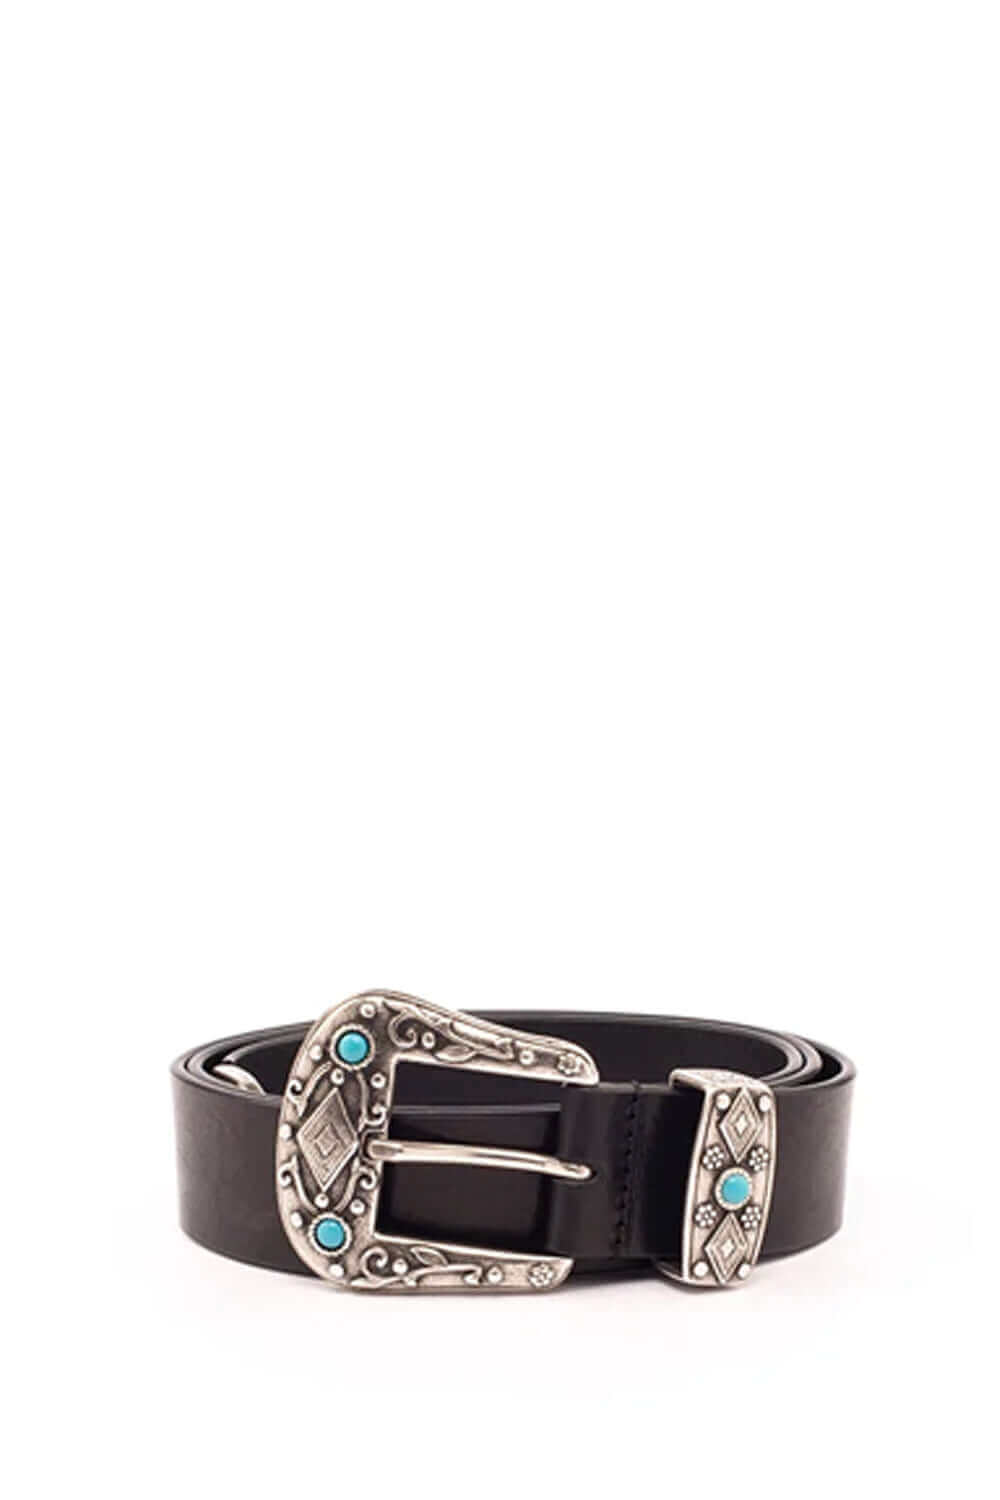 KYRA BELT Black leather belt. Buckle, loop and tip decorated with engravings and applications of turquoise stones. Made in Italy, height 3.5 cm. HTC LOS ANGELES